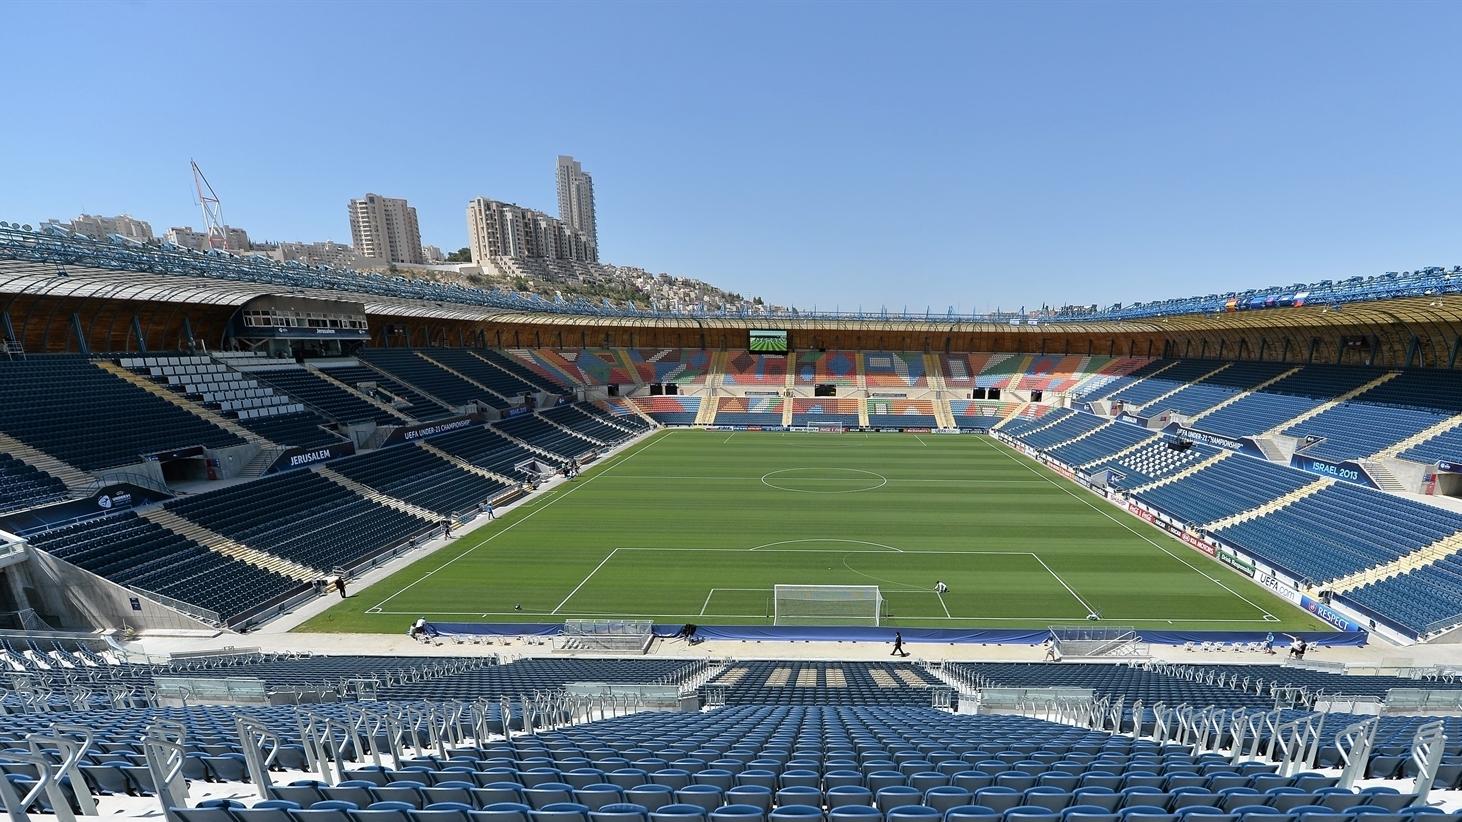 jerusalem_s_teddy_stadium_is_an_apt_place_for_israel_s_last_group_a_game_to_take_place_says_luzon.jpeg